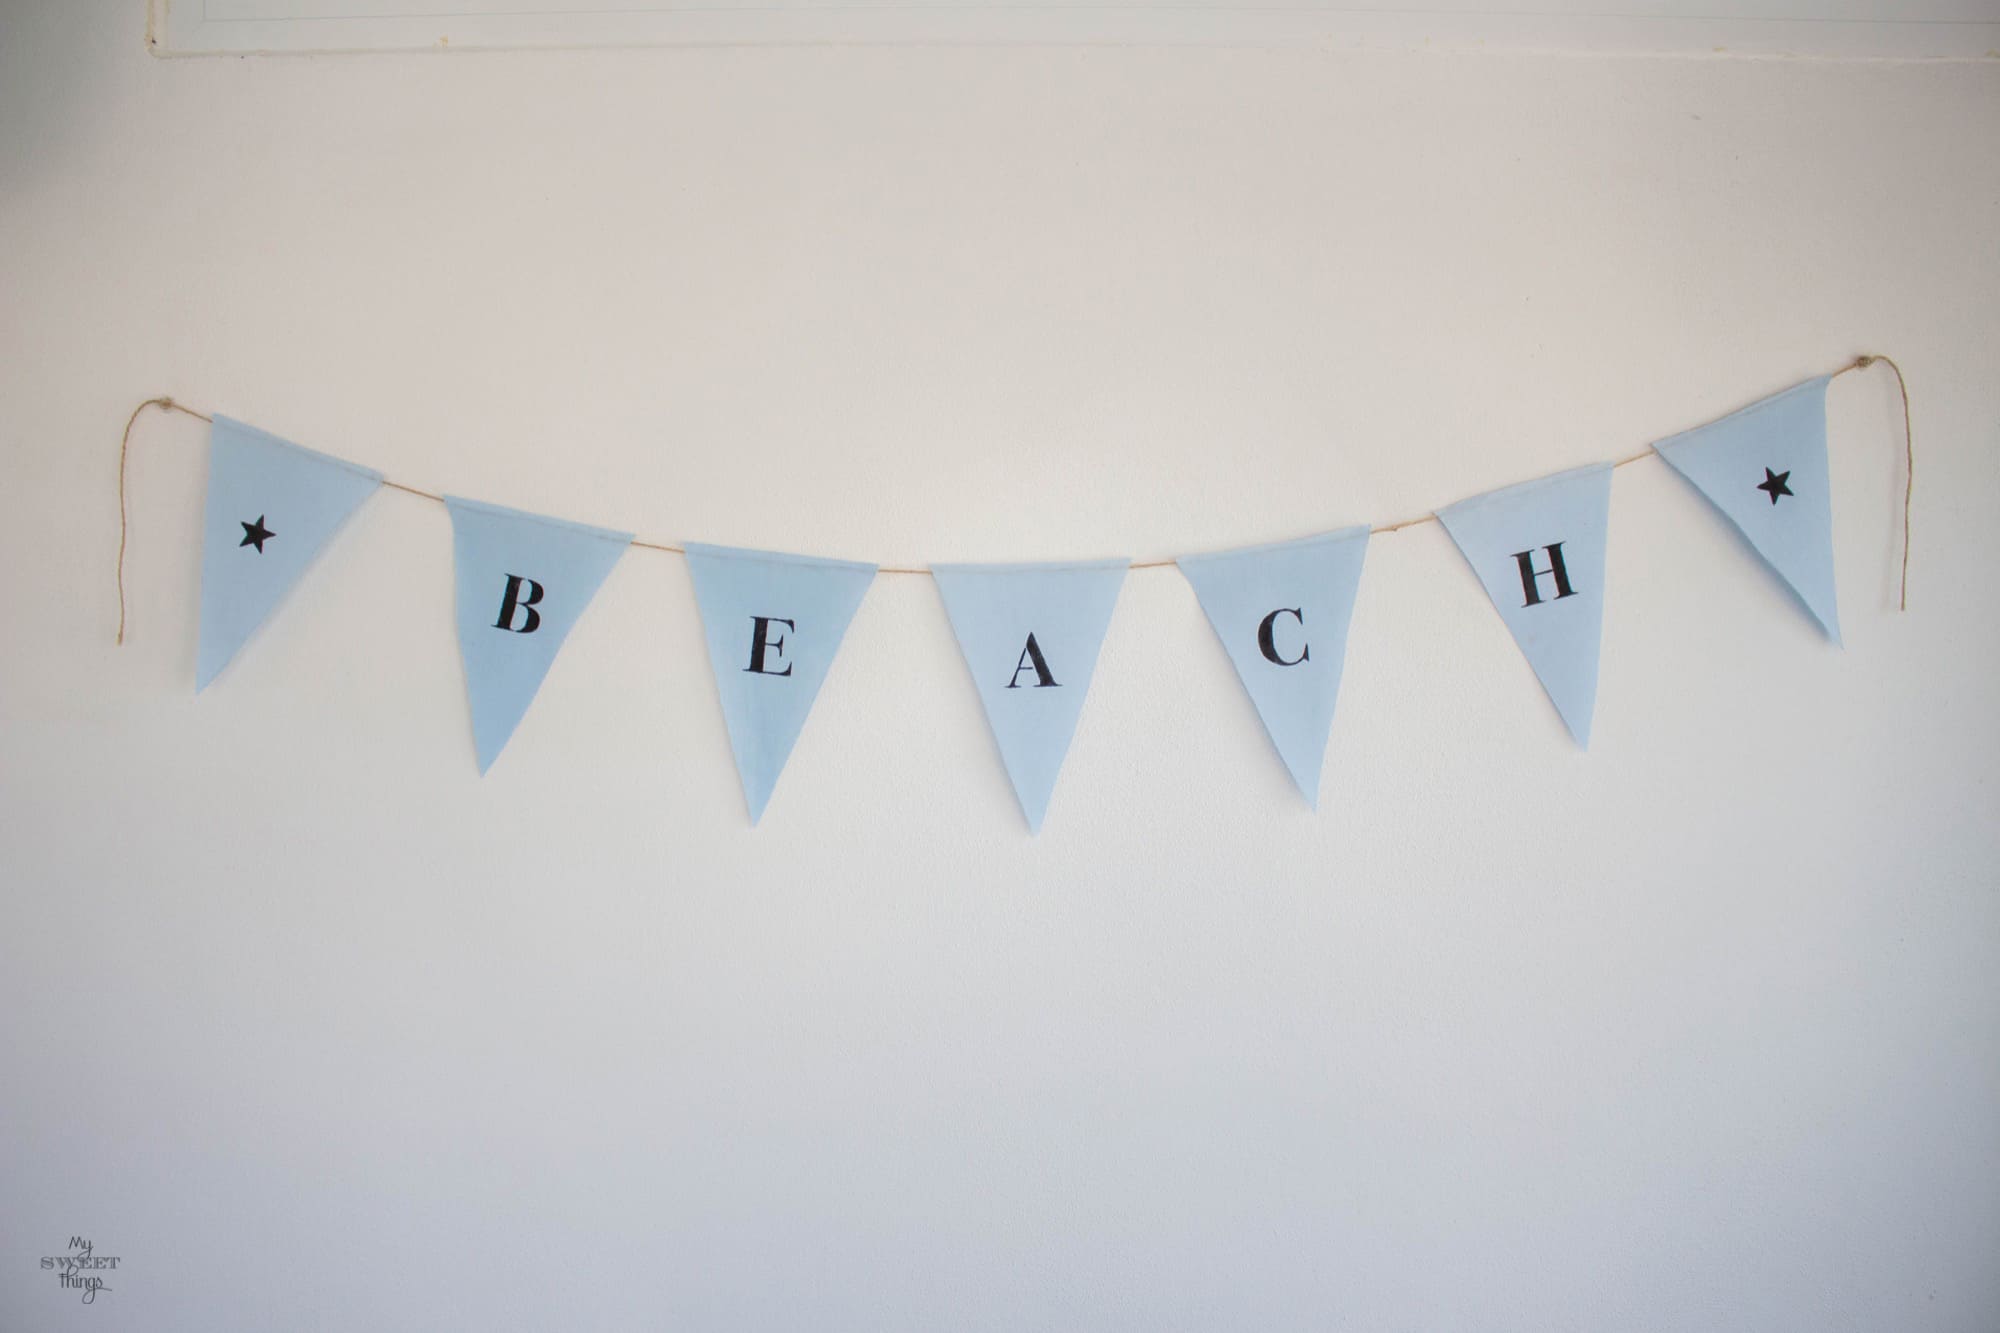 Beach banner out of pieces of scrap fabric · Via www.sweethings.net